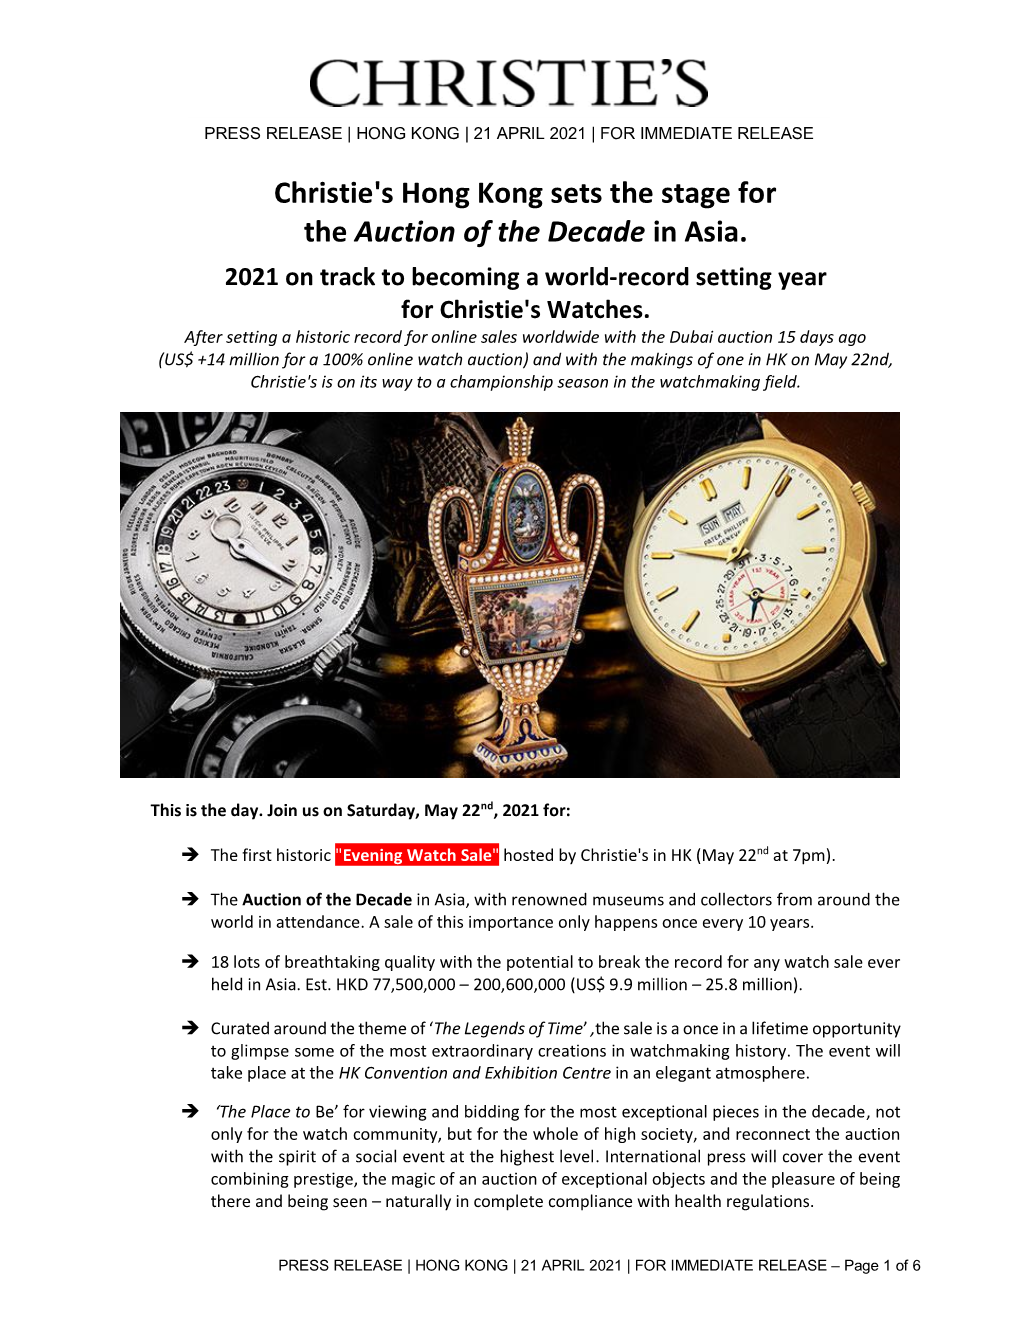 Christie's Hong Kong Sets the Stage for the Auction of the Decade in Asia